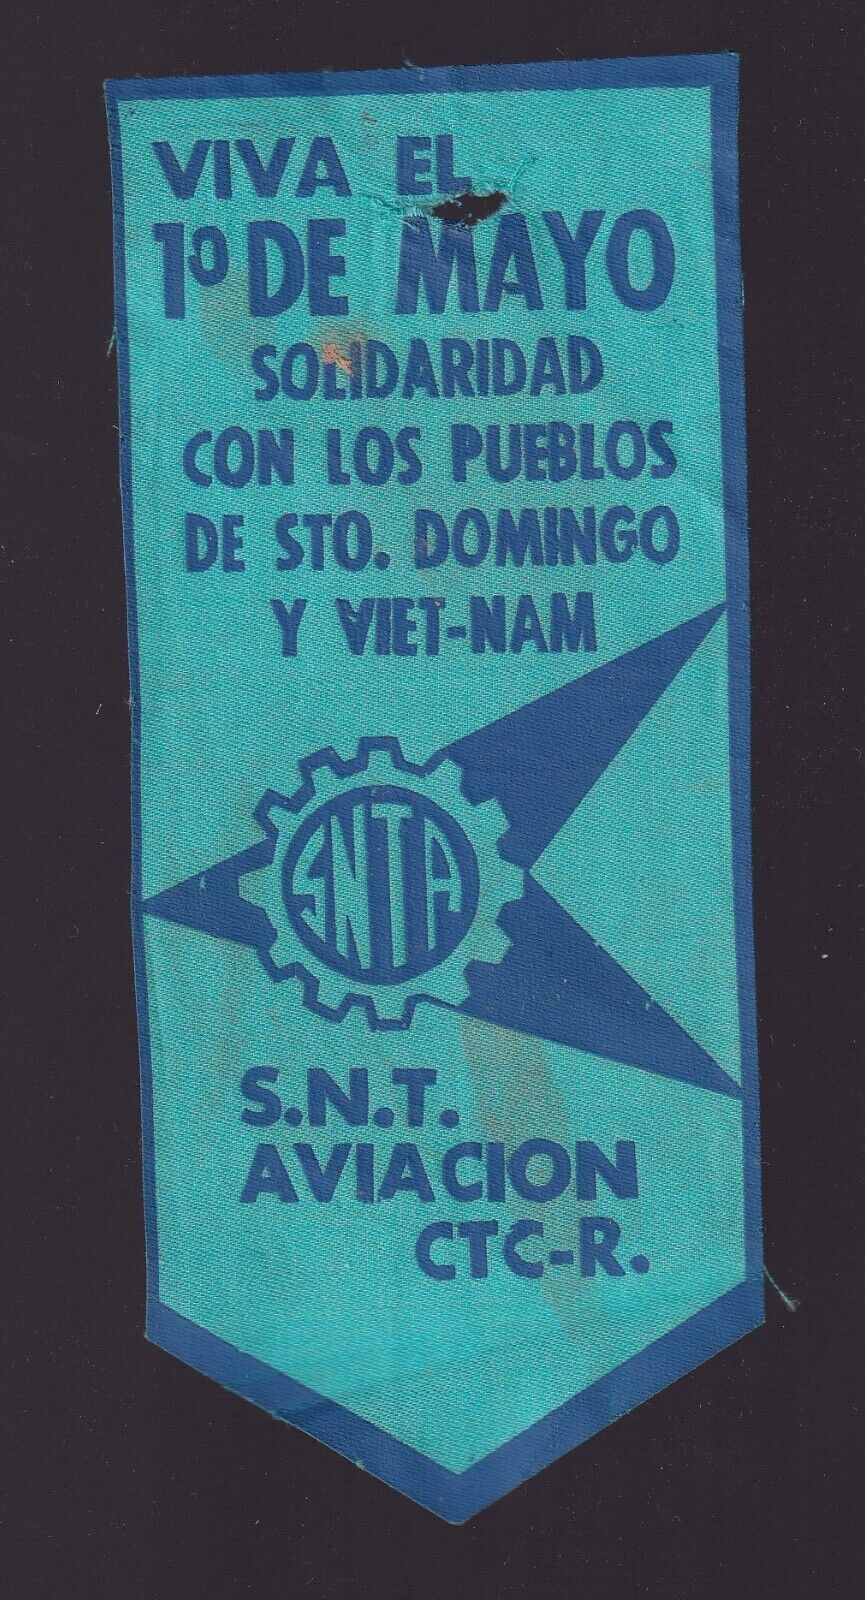 Cuba fabric lapel patch for May 1st parade of Aviation Workers Union, 1965